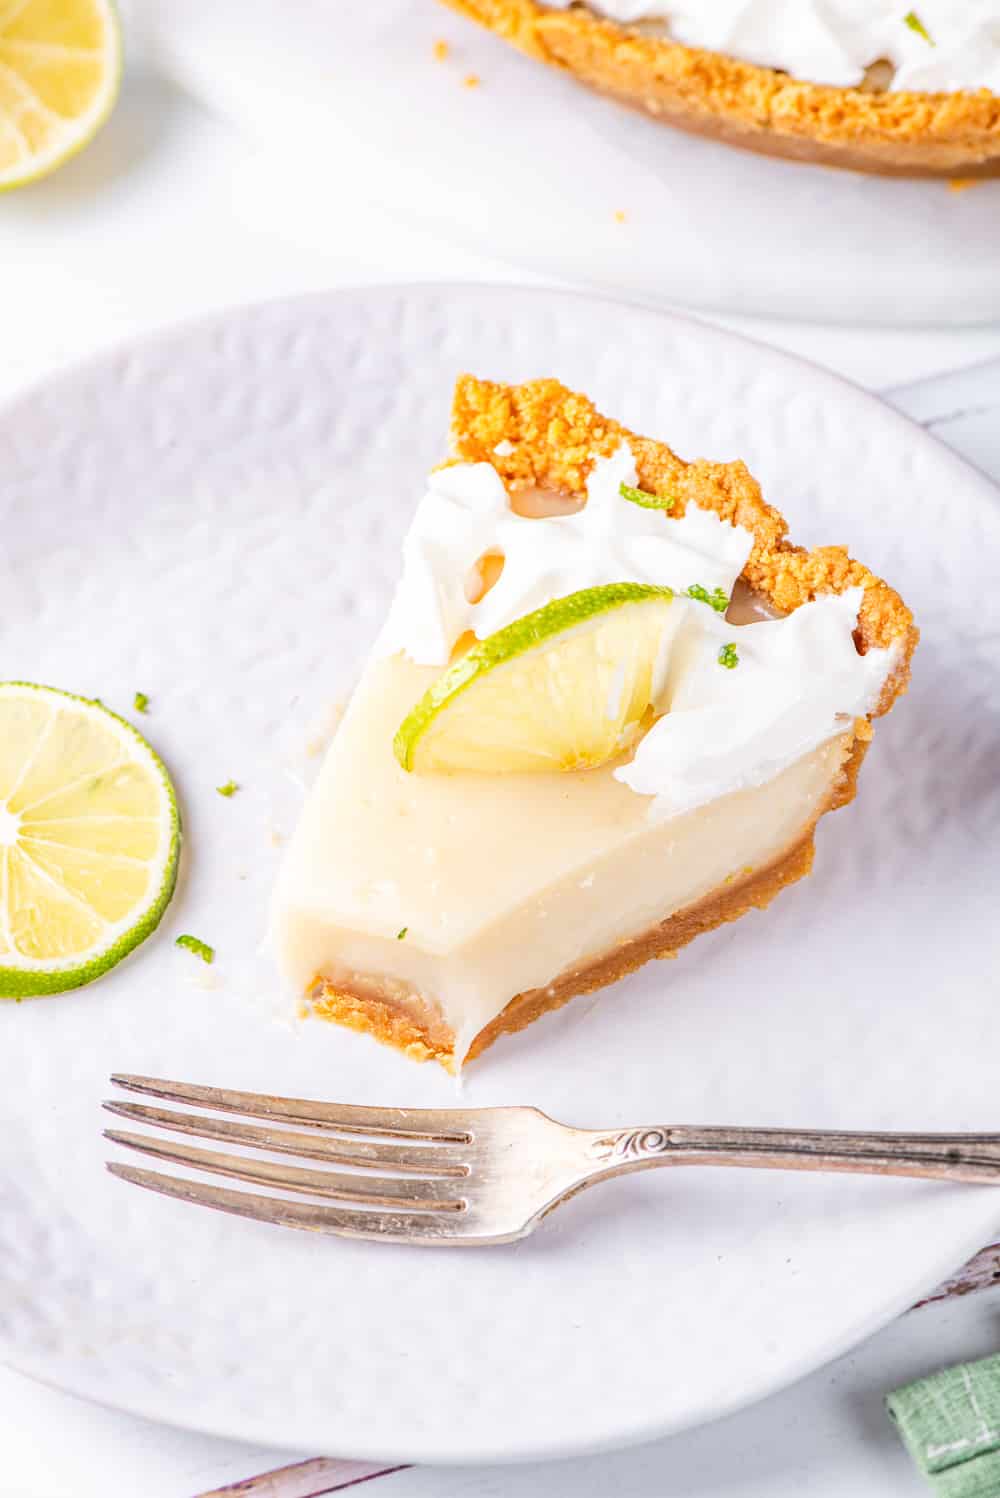 A piece of vegan key lime pie with the tip sliced off and a metal fork in front of it, all on a white plate. The plate is on a white counter.